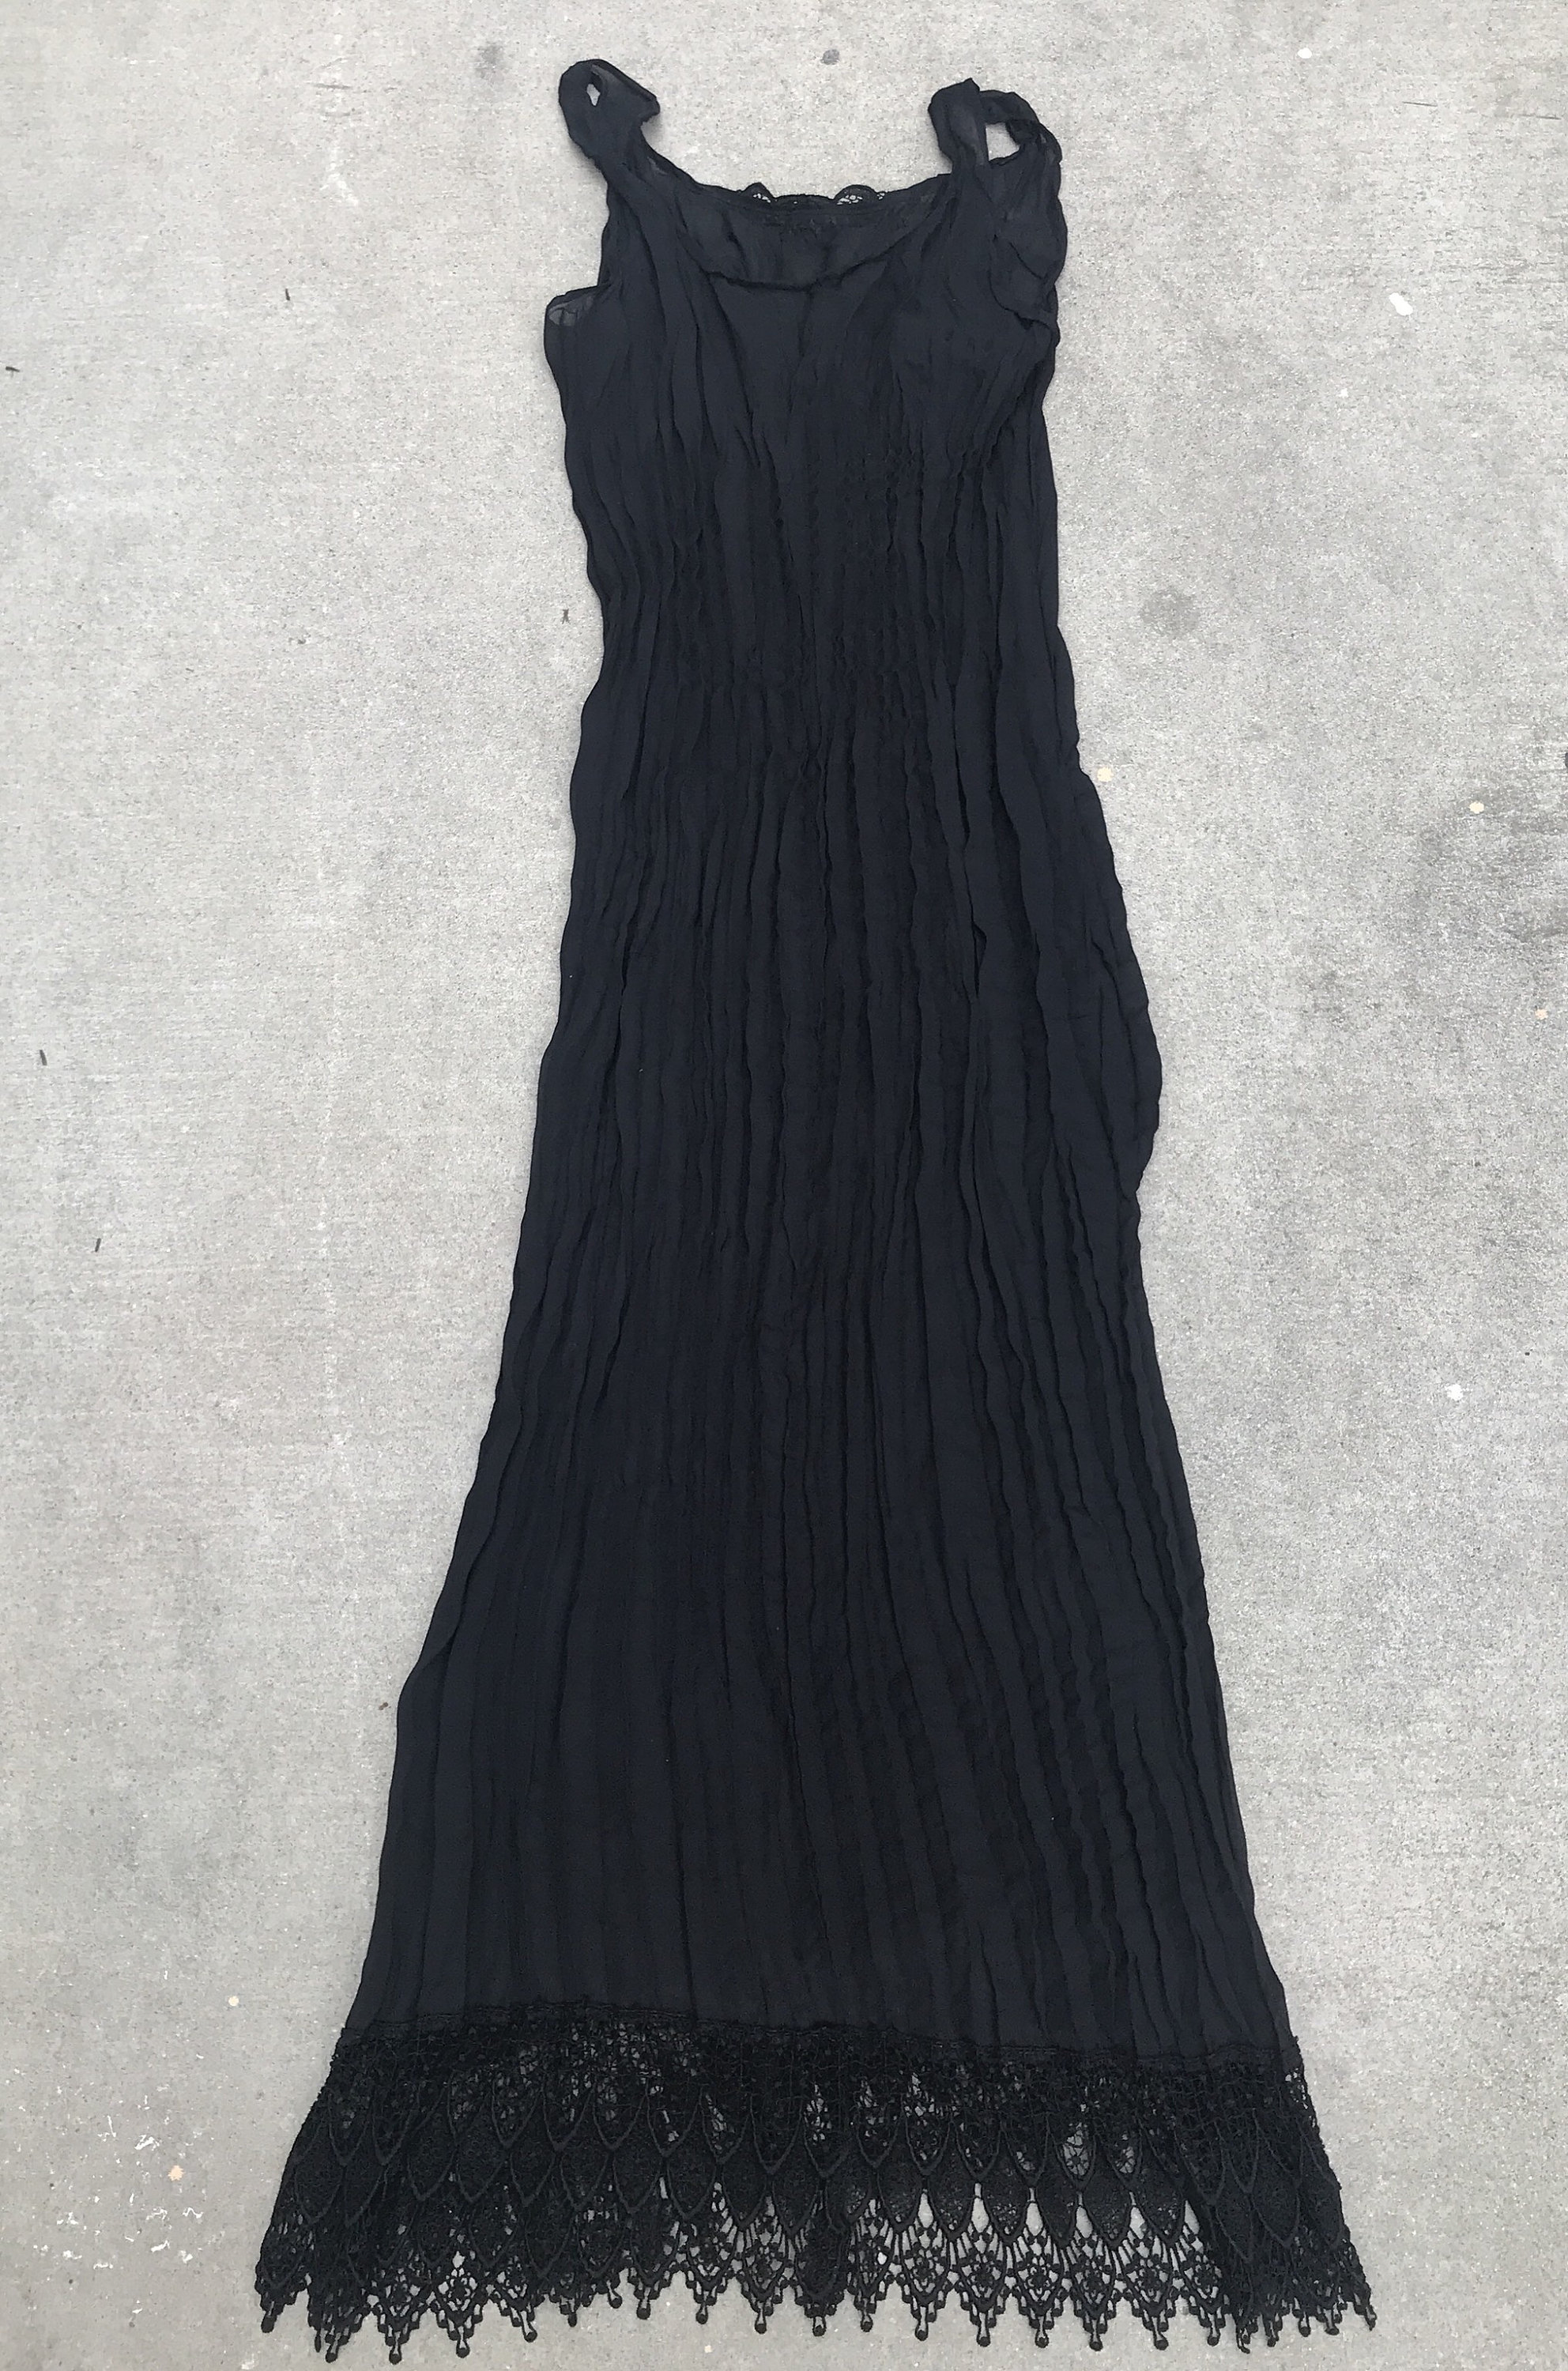 Sheer Crinkly Black Lace Detailed Long Black Dress Size Small - Etsy